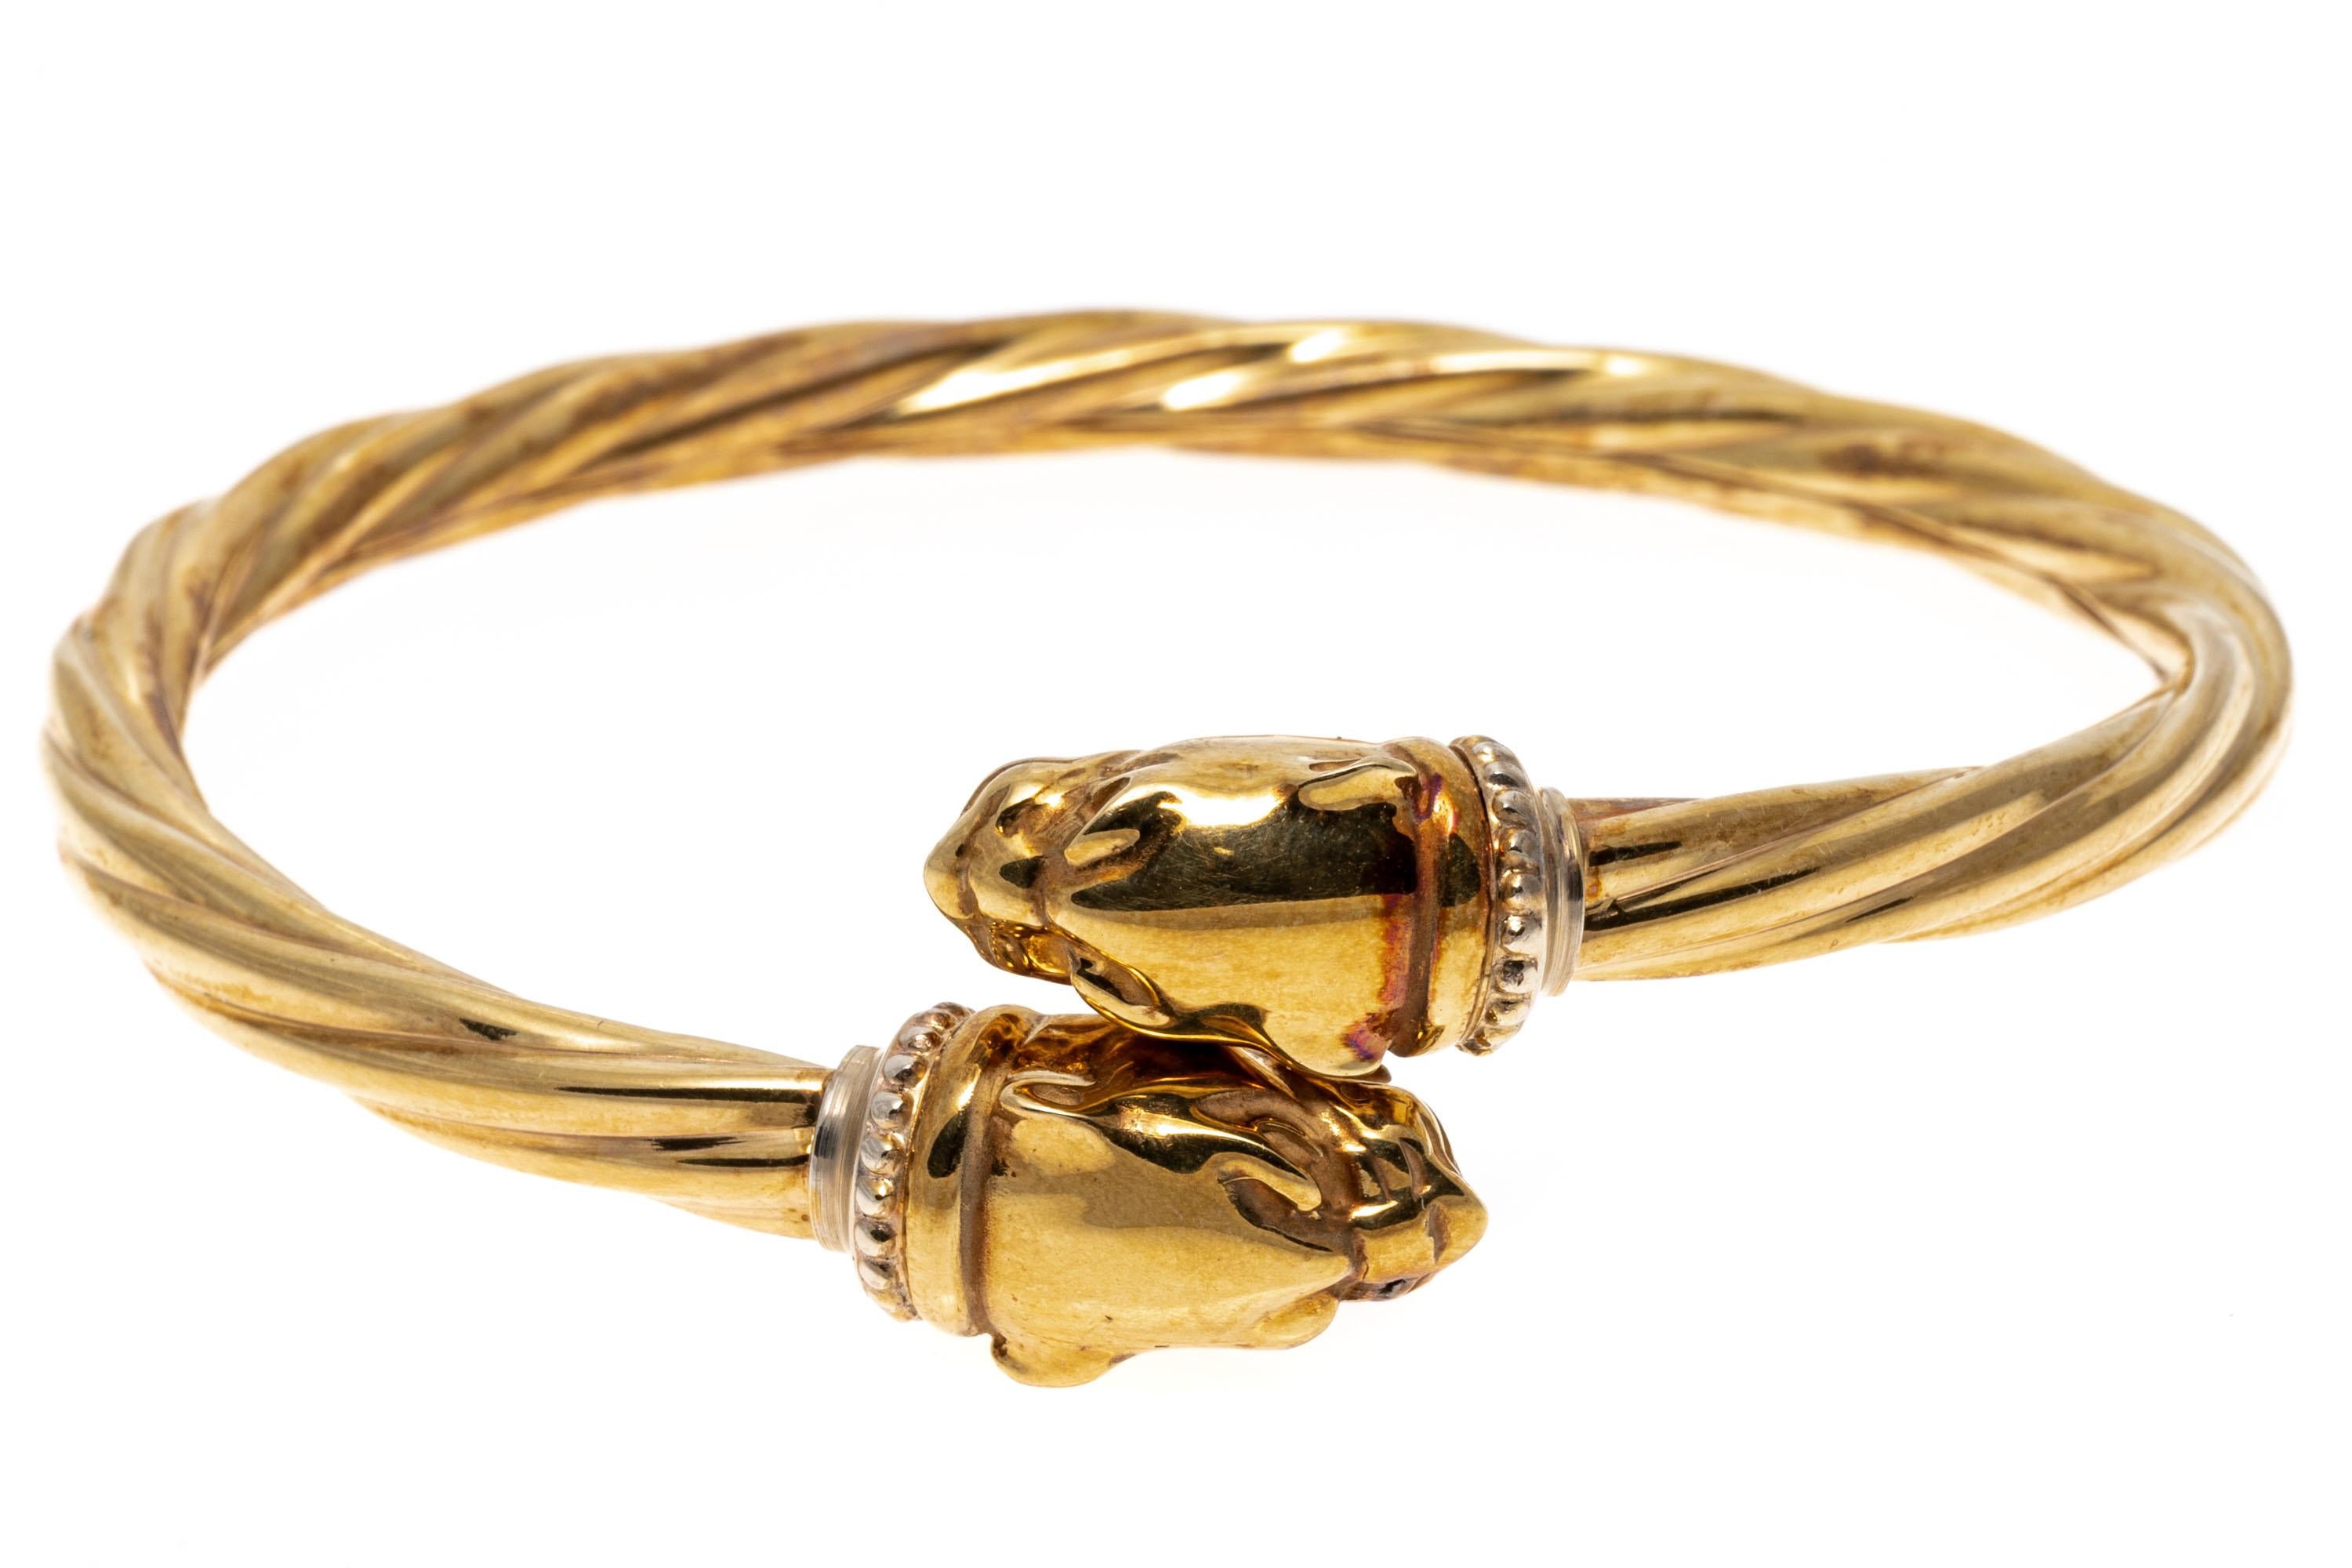 14k yellow gold bracelet. This stylish ribbed bypass style bangle bracelet features opposing roaring panther heads, decorated with yellow gold and sterling beaded collars.
Marks: 14k, sterling
Dimensions: 2 5/16